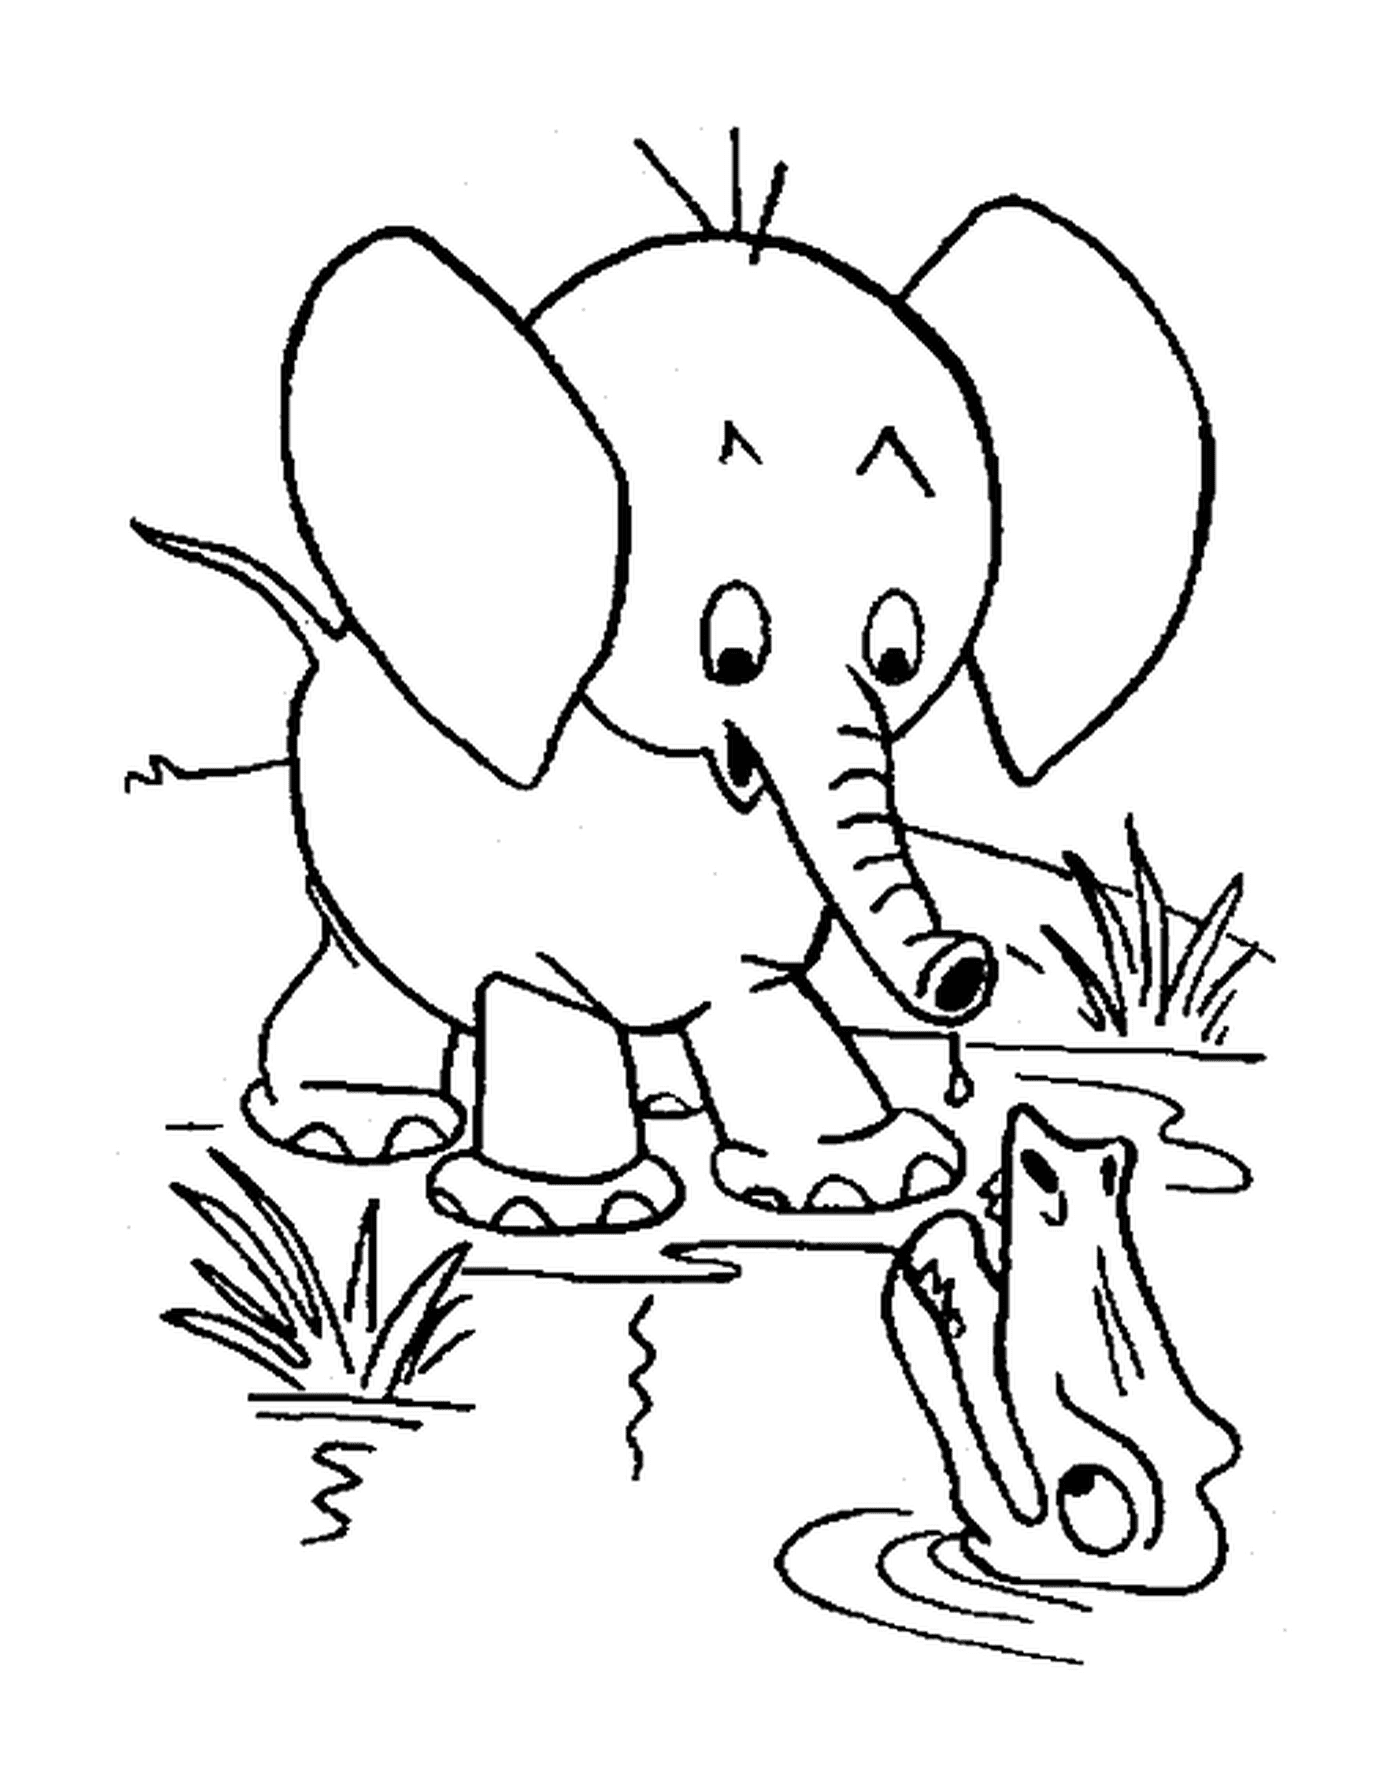  An elephant standing by the water with a crocodile 